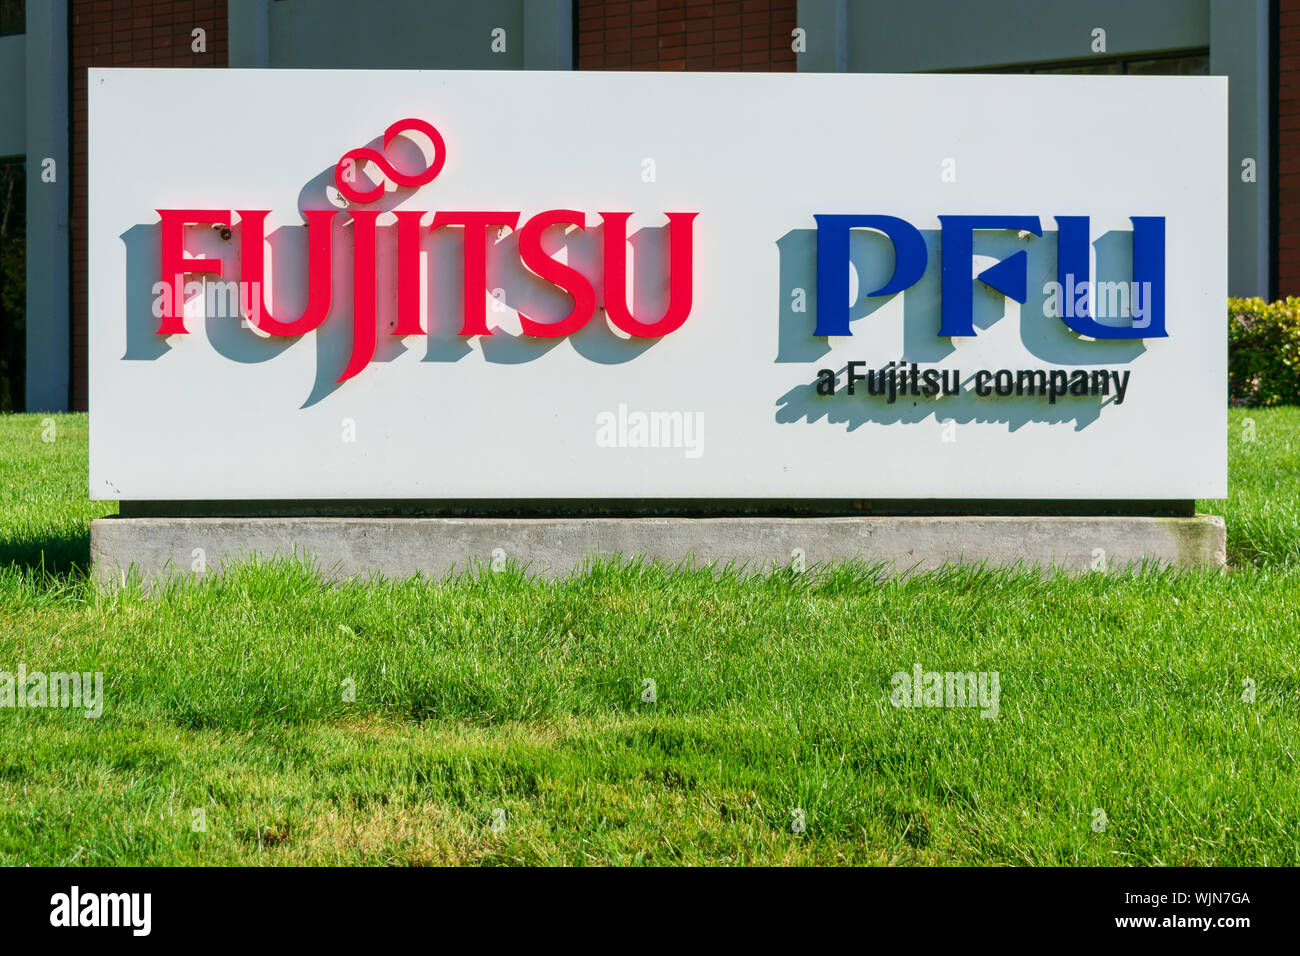 Fujitsu and PFU America sign at the company office in Silicon Valley, high-tech hub of San Francisco Bay Area Stock Photo